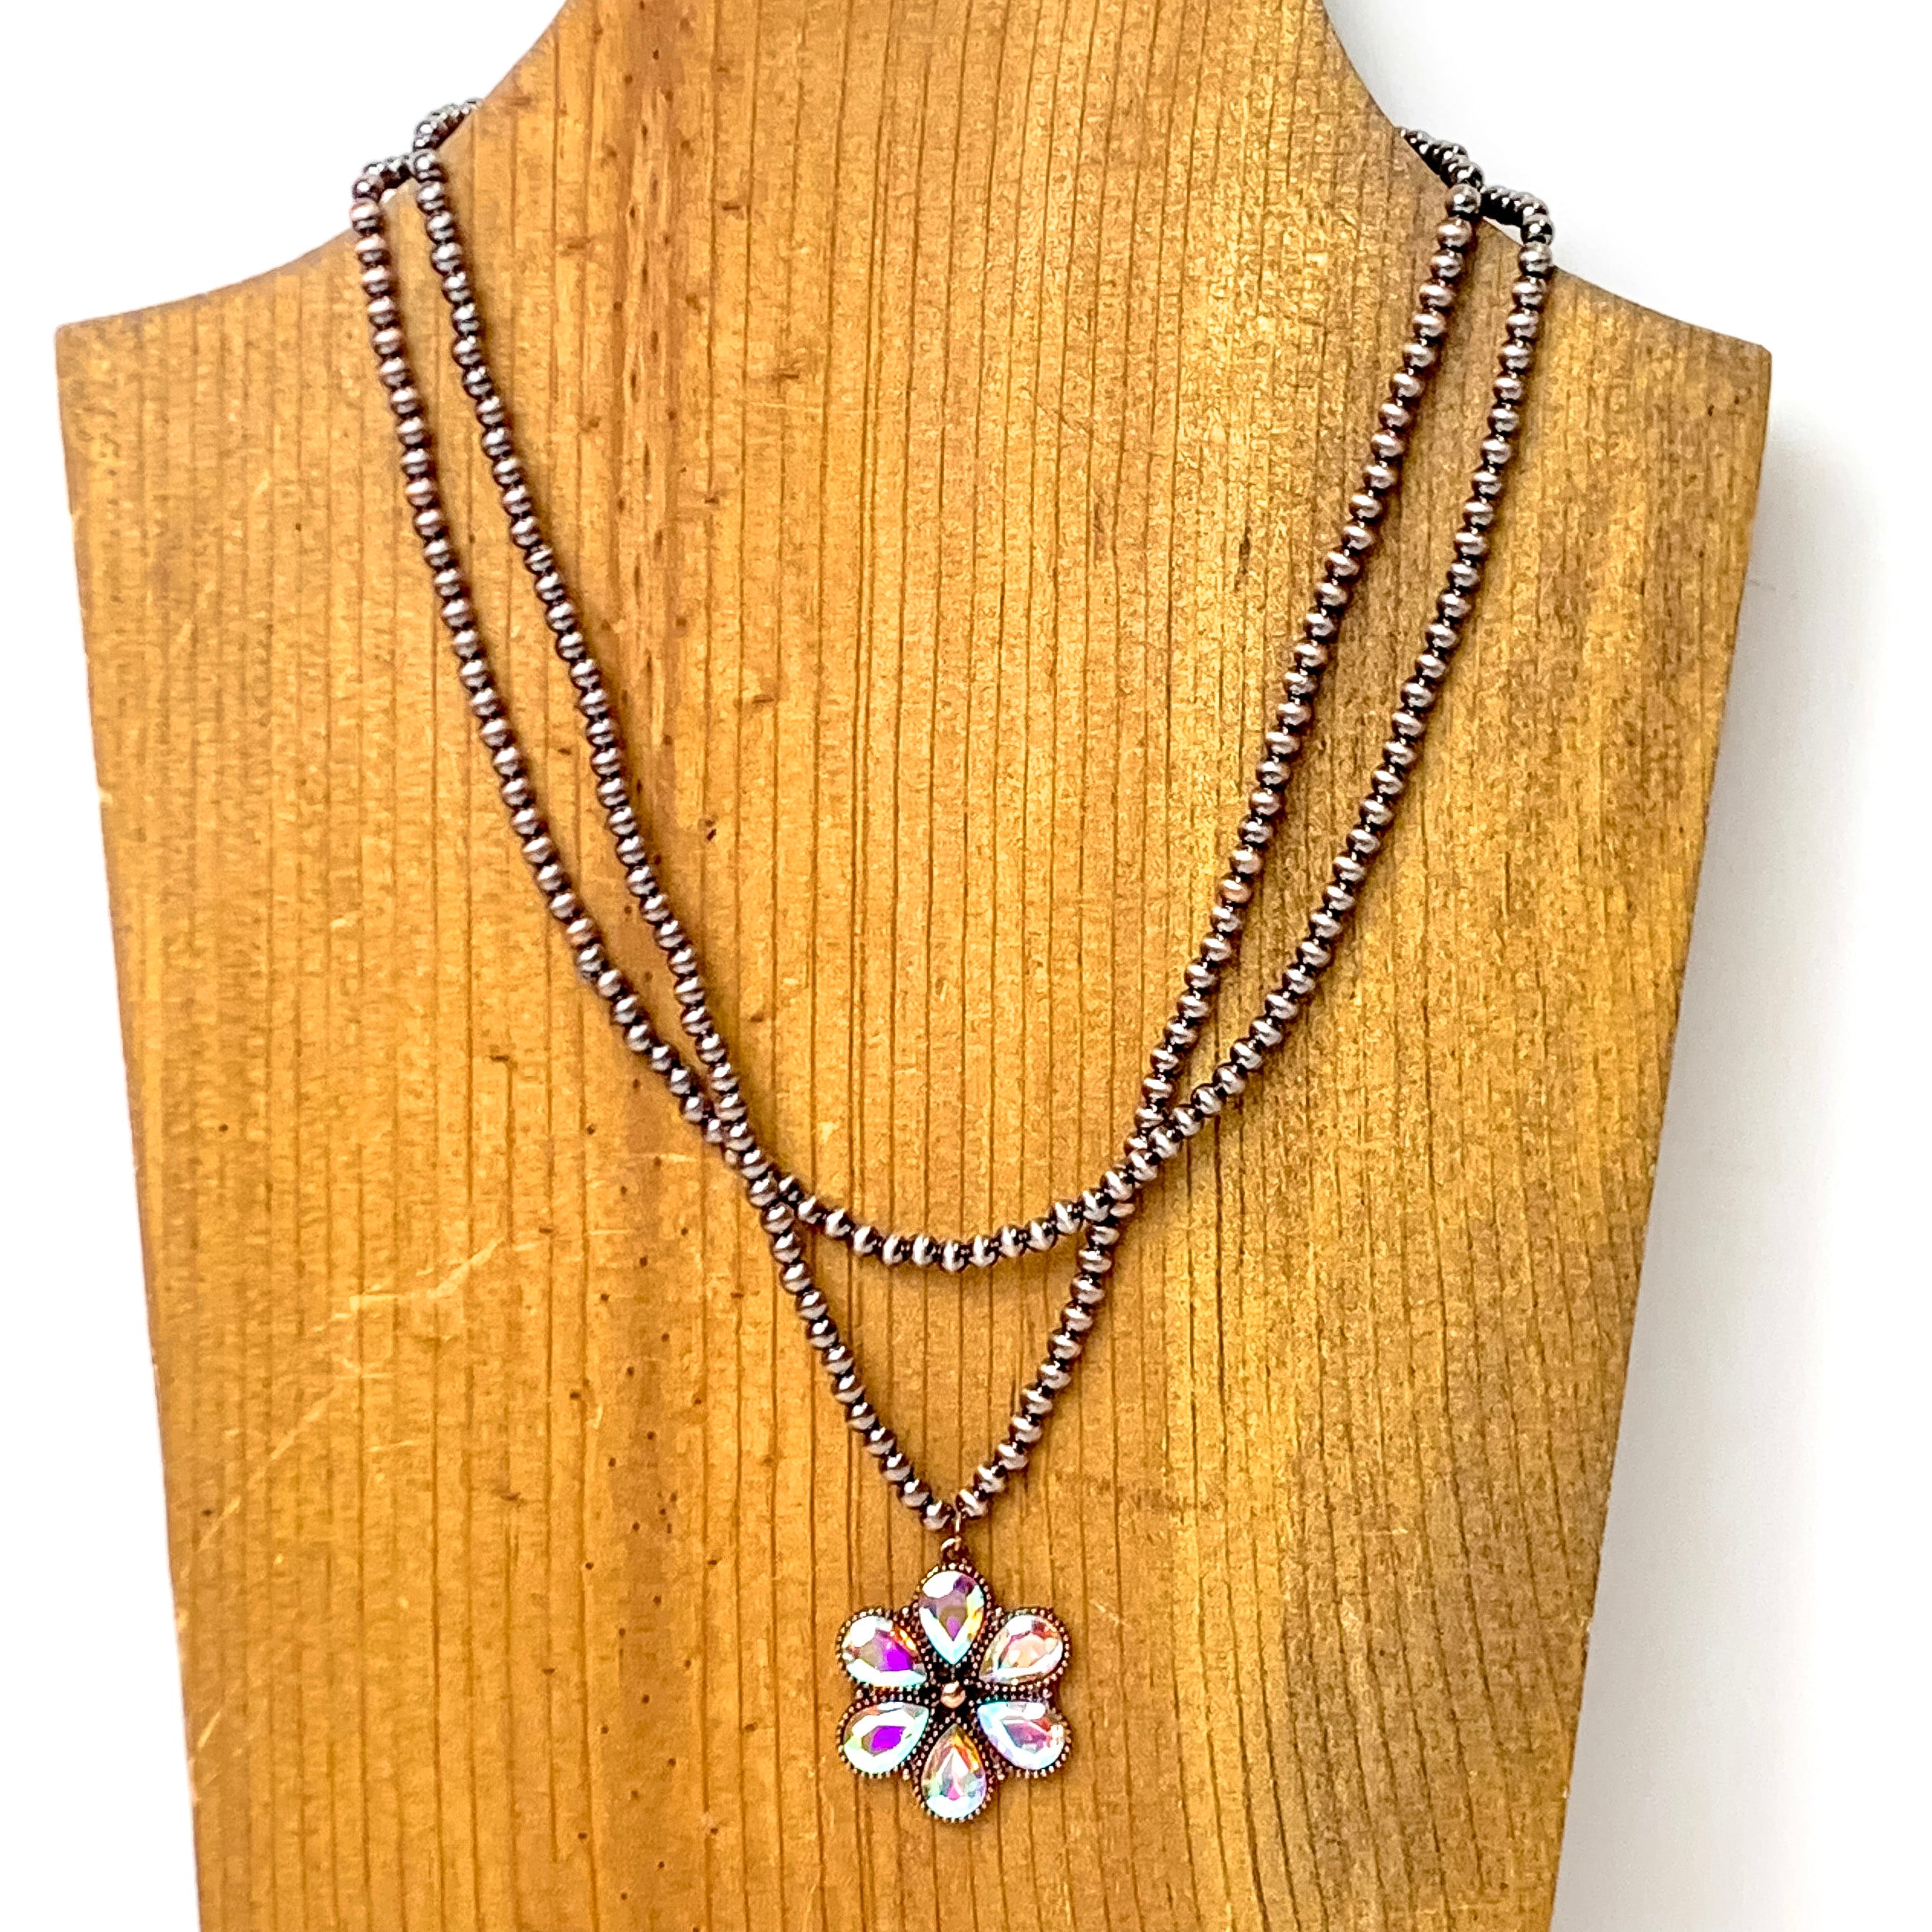 Bourbon Blooms Faux Navajo Pearl Necklace in Copper Tone - Giddy Up Glamour Boutique